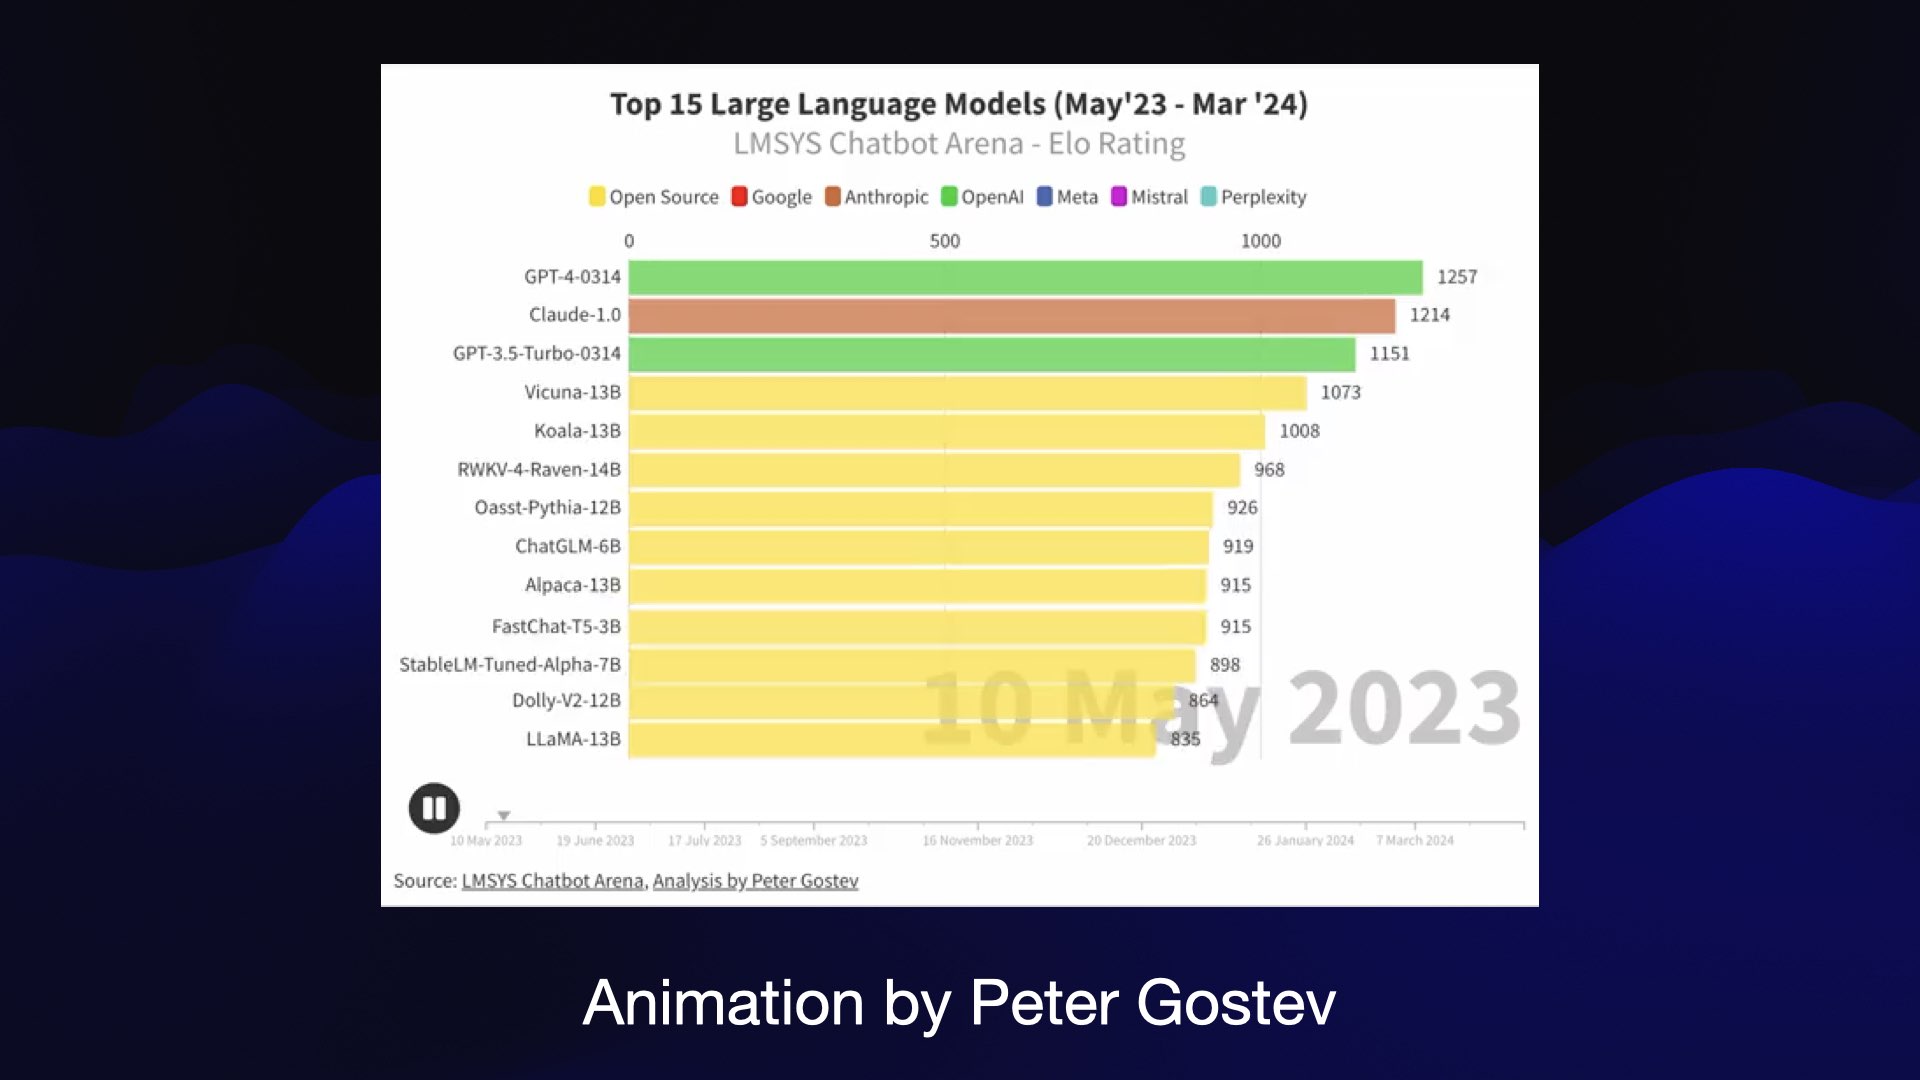 Top 15 Large Language Models (May'23 - Mar '24) Animation by Peter Gostev 